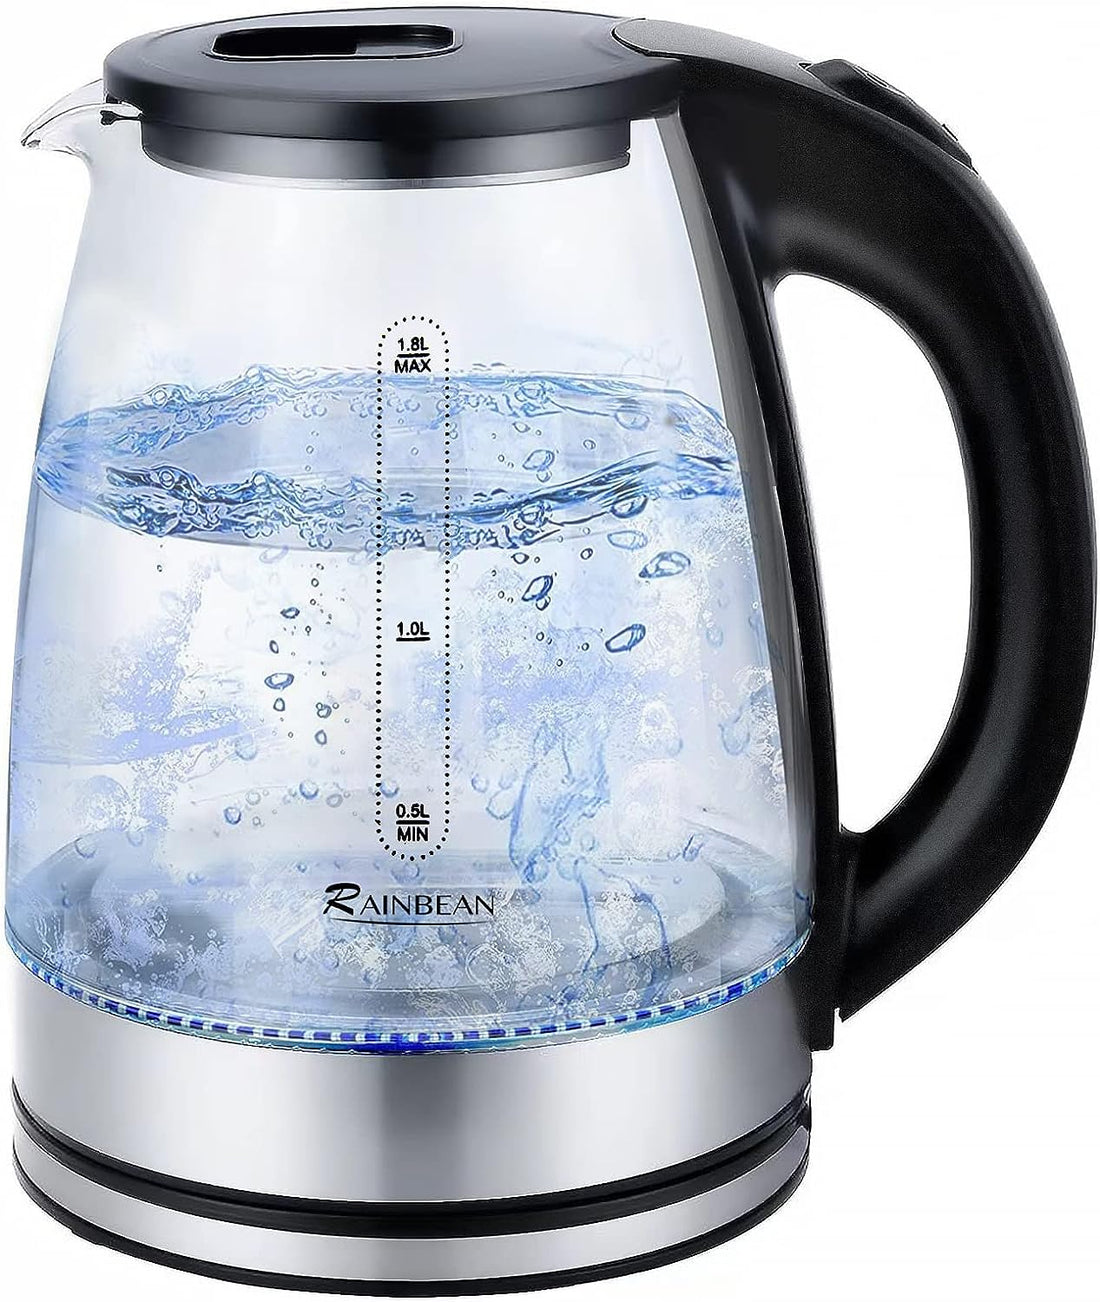 NEW Electric Kettle Water Boiler, 1.8L Electric Tea Kettle, Wide Opening Hot Water Boiler With LED Light, Auto Shut-Off &amp; Boil Dry Protection, Glass Black